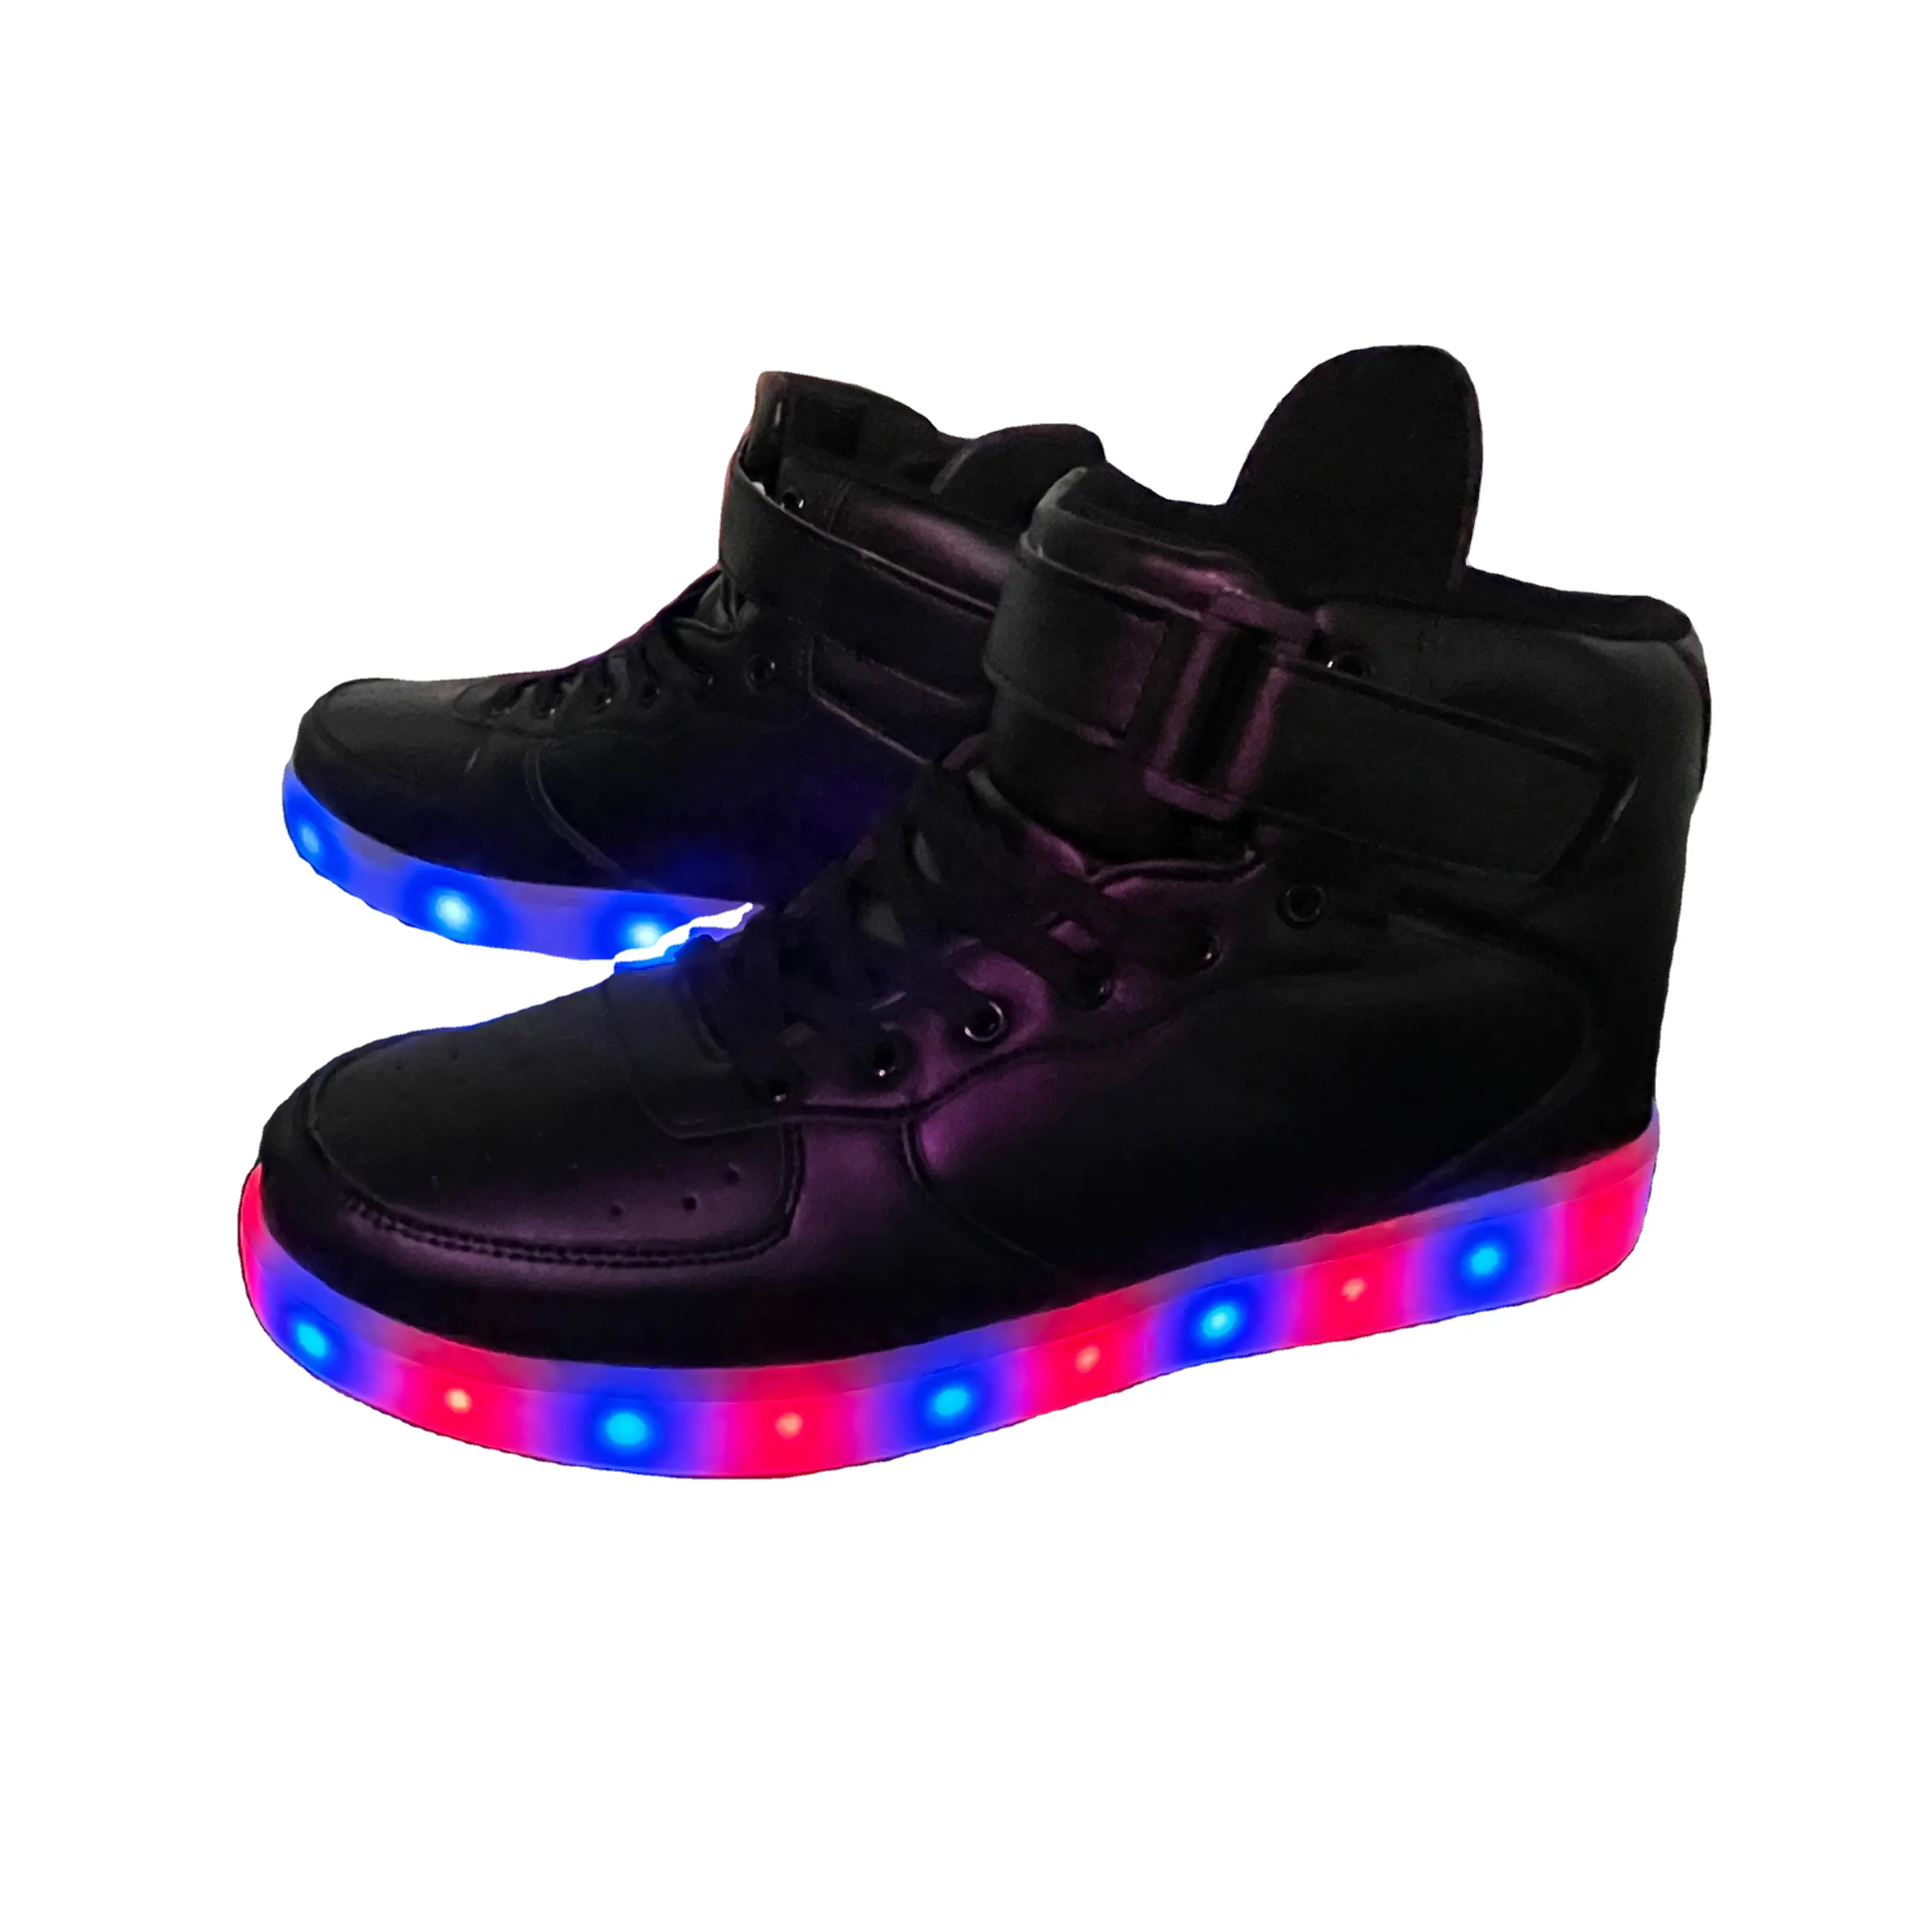 2021 Rave neon USB Charging LED Light Up Shoes Sports Dancing Sneakers for Electric Daisy Carnival